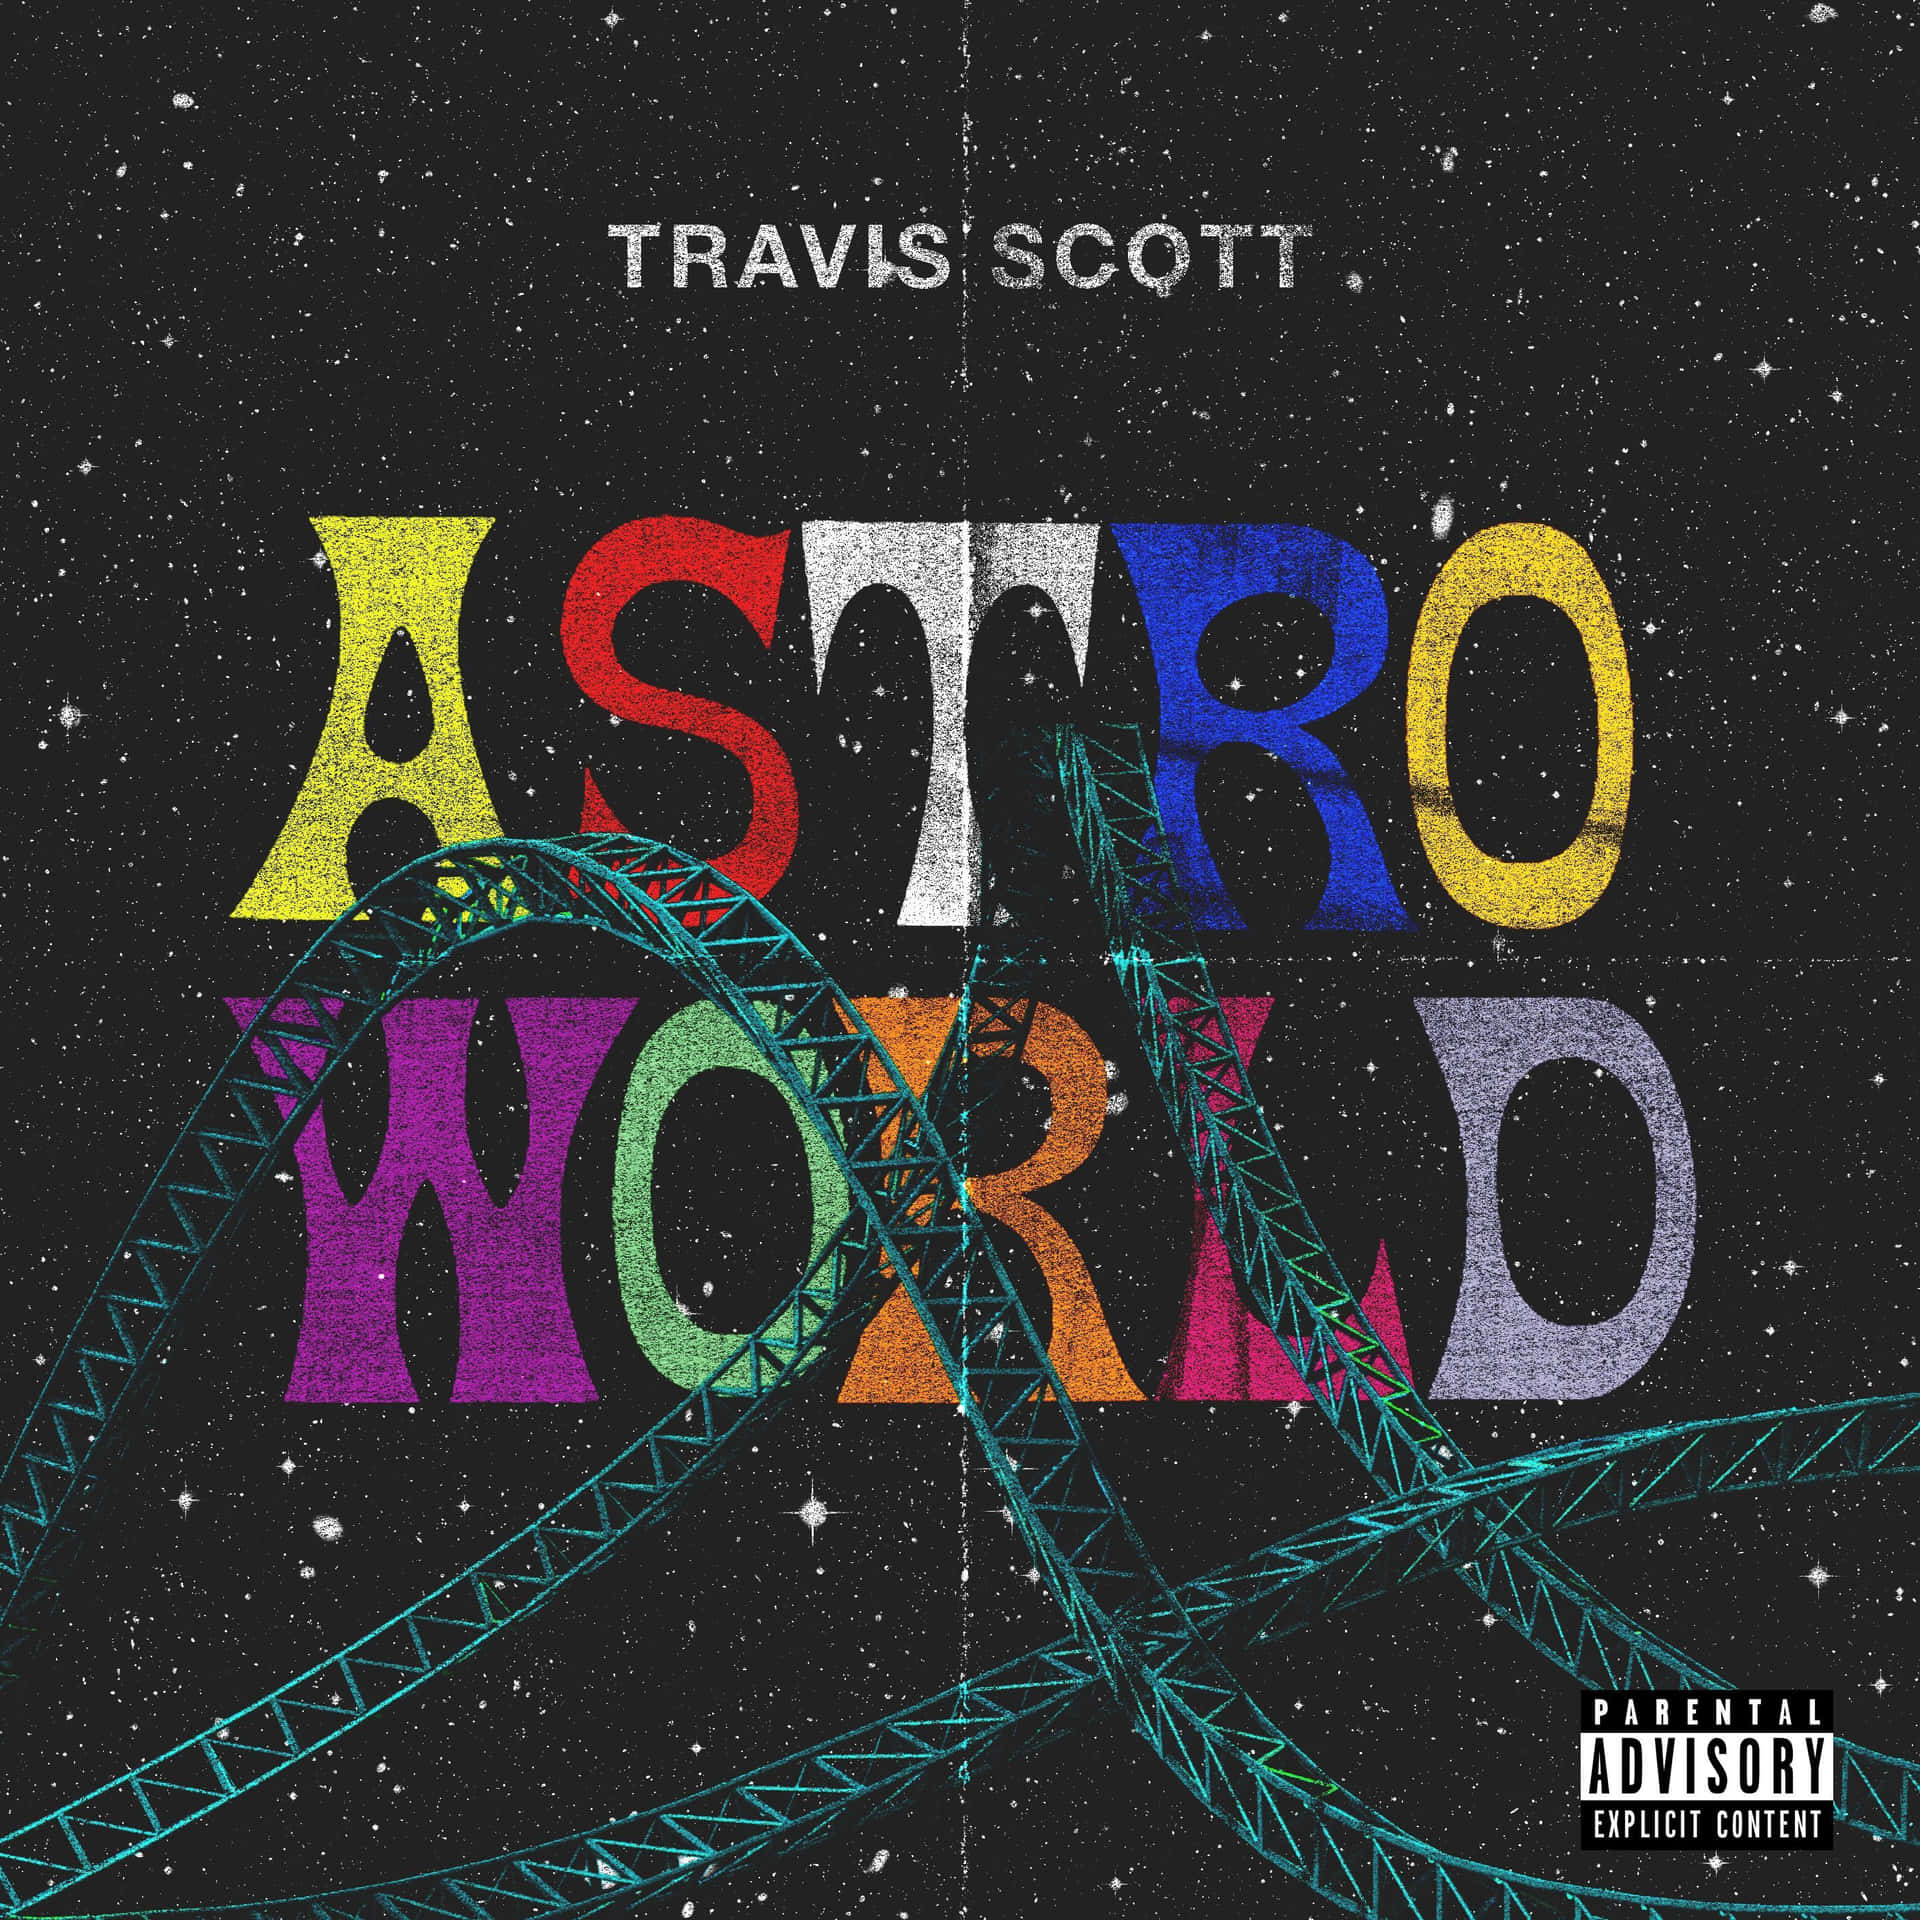 Welcome to Astroworld - where dreams come to life